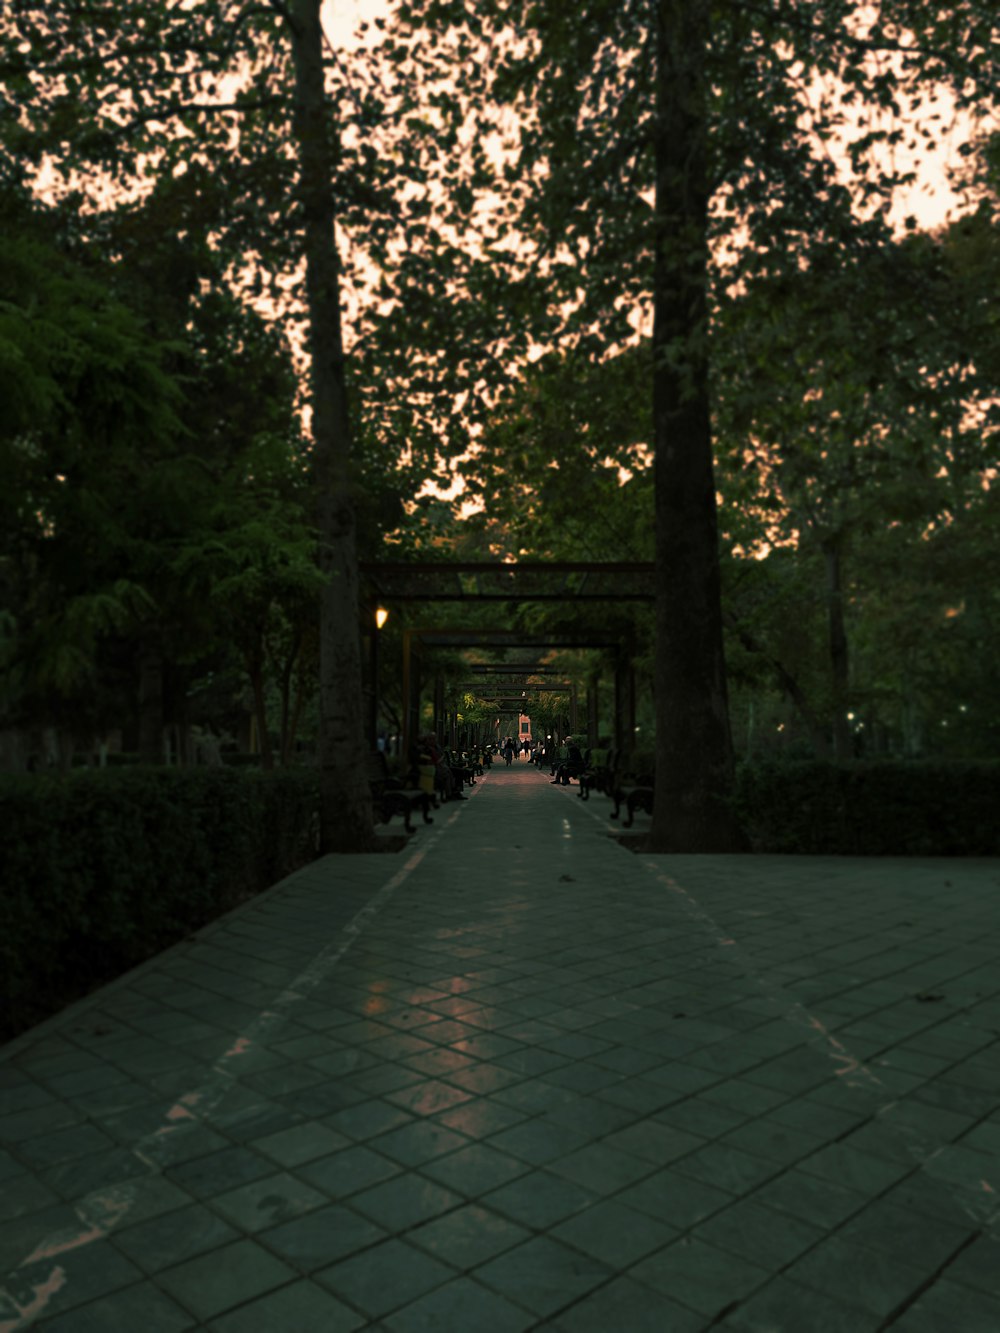 a walkway in a park with benches and trees